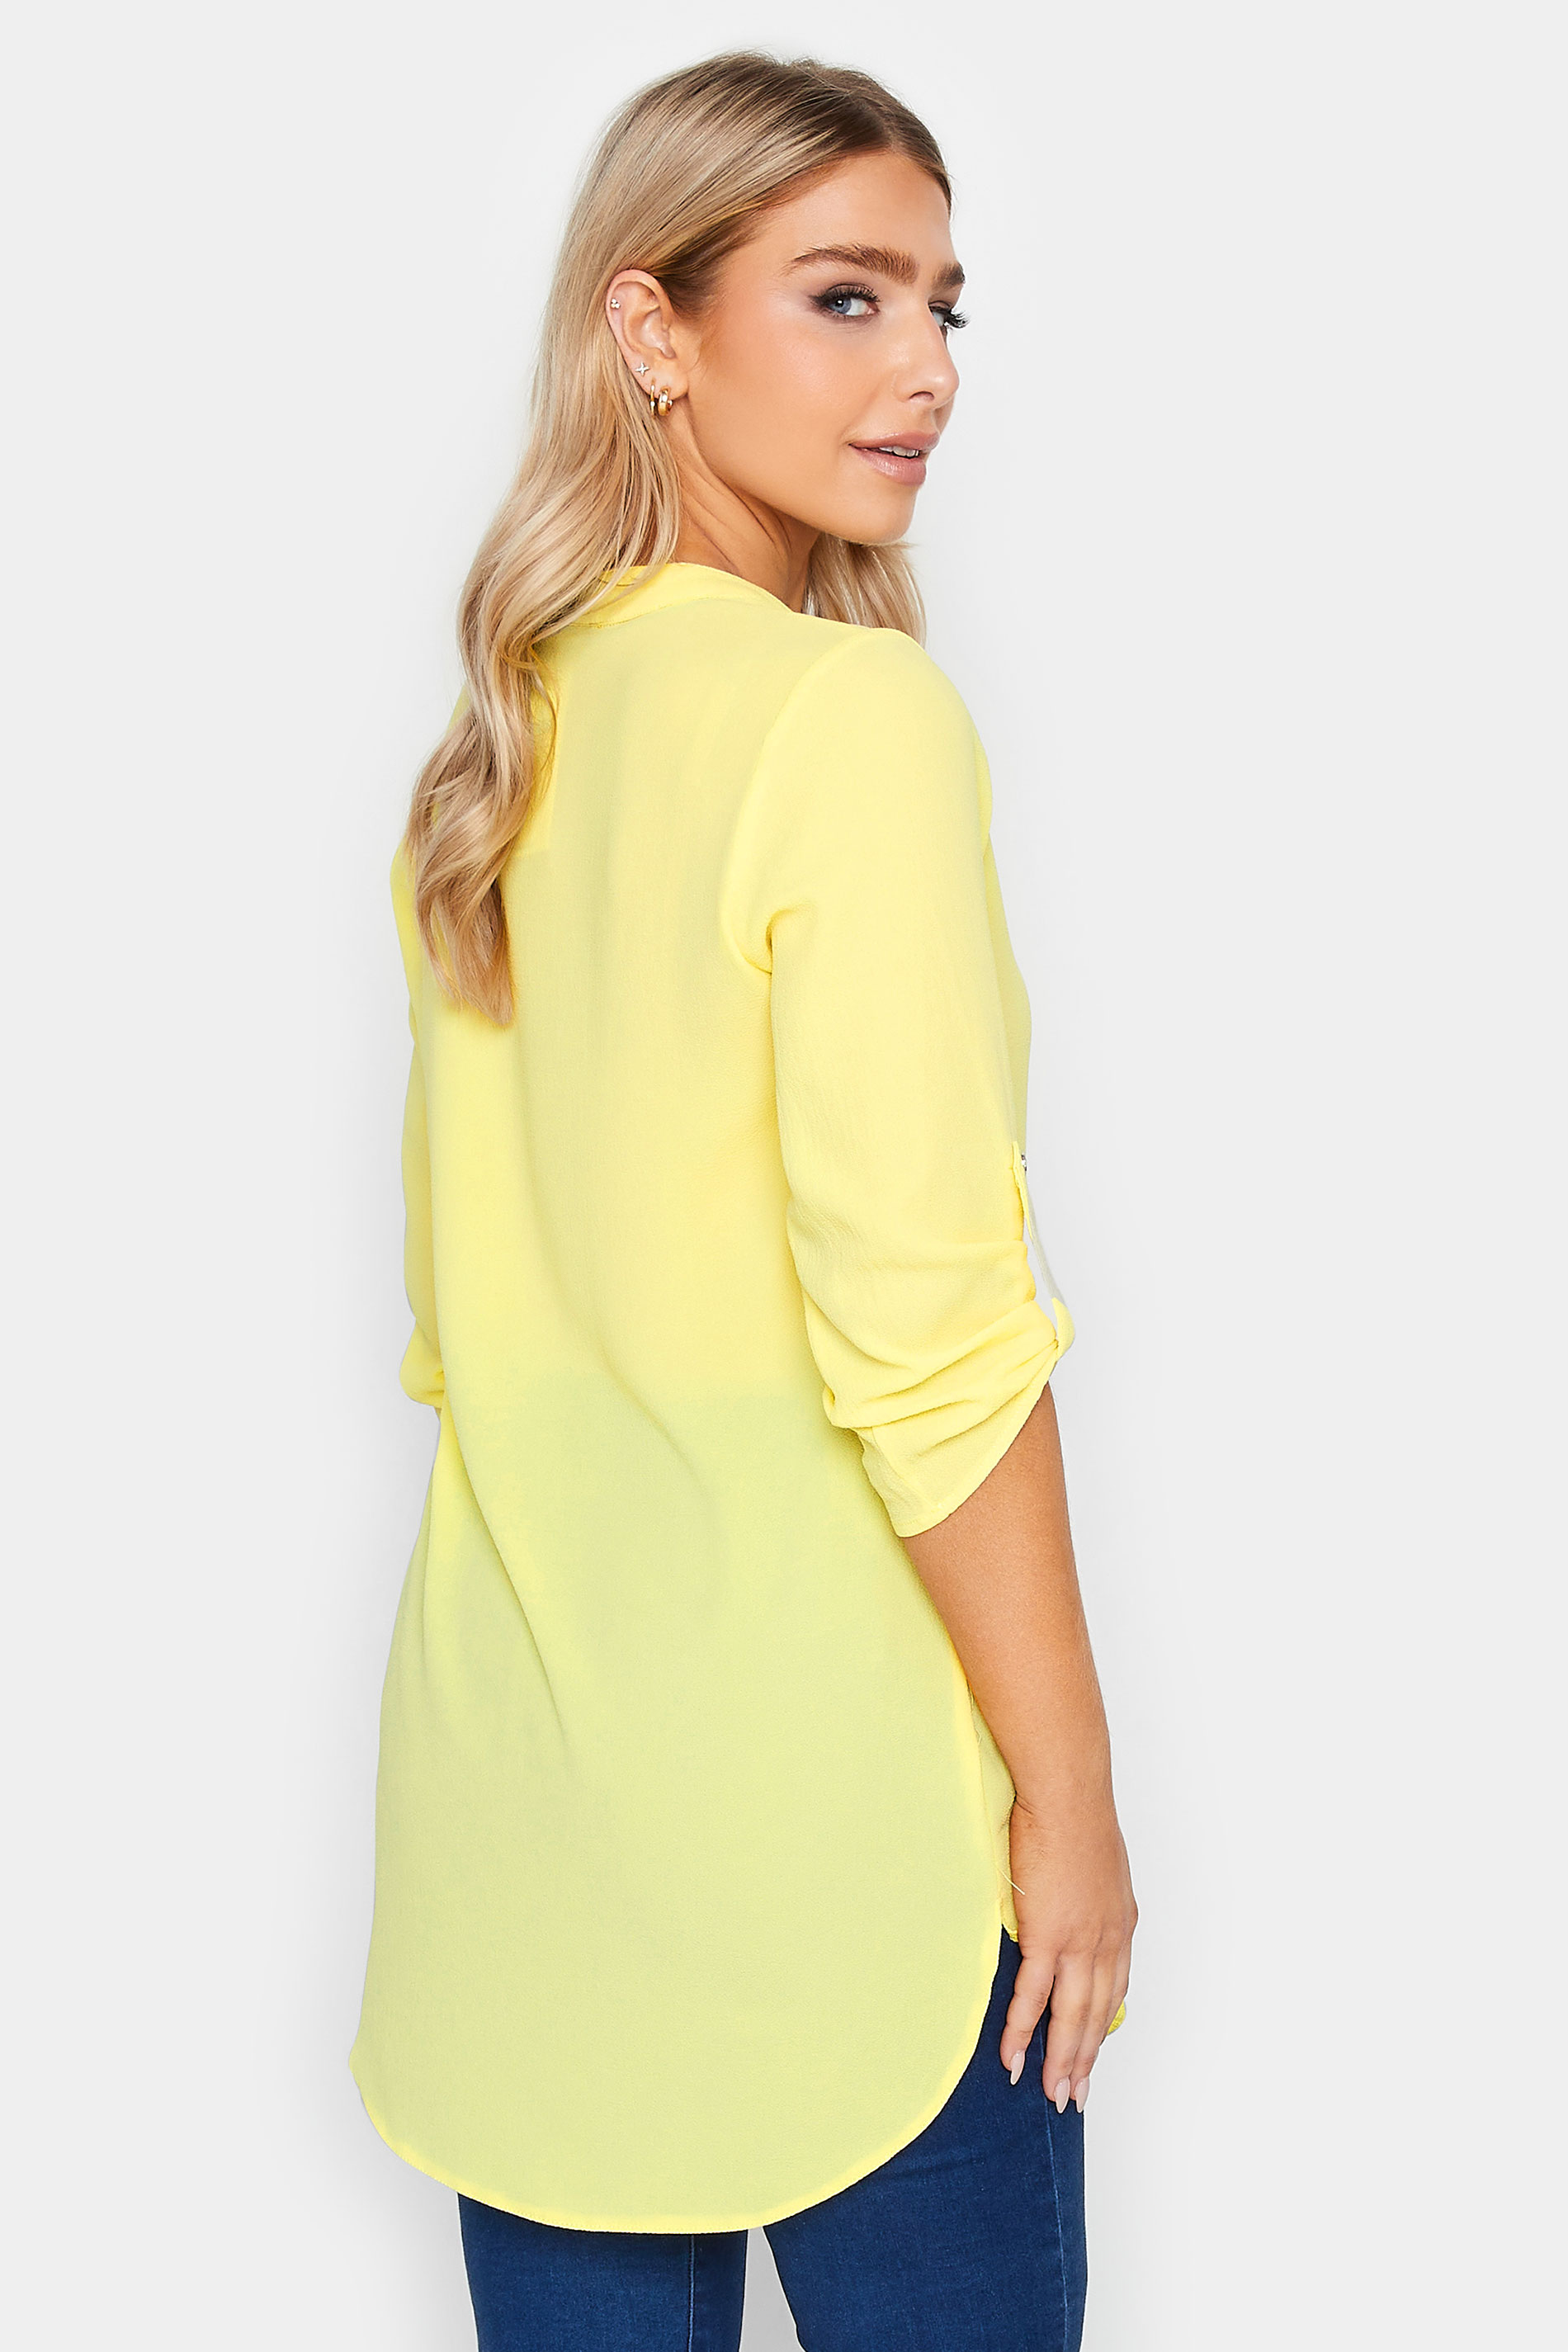 M&Co Yellow Statement Button Tab Sleeve Blouse | M&Co 3